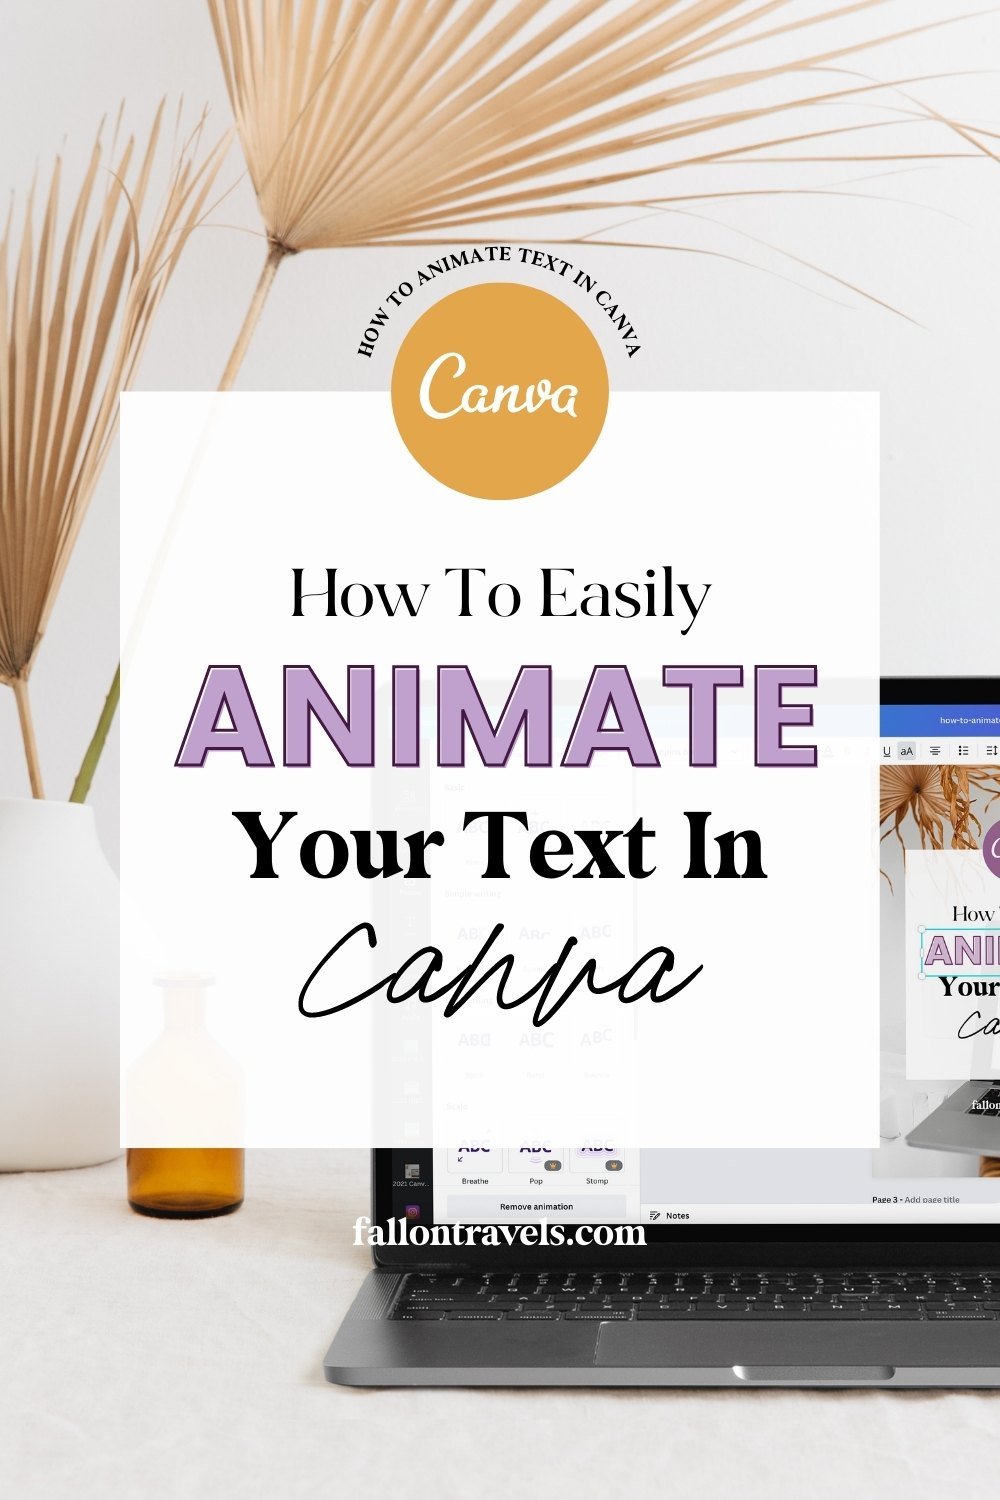 How to Animate Text in Canva | Fallon Travels